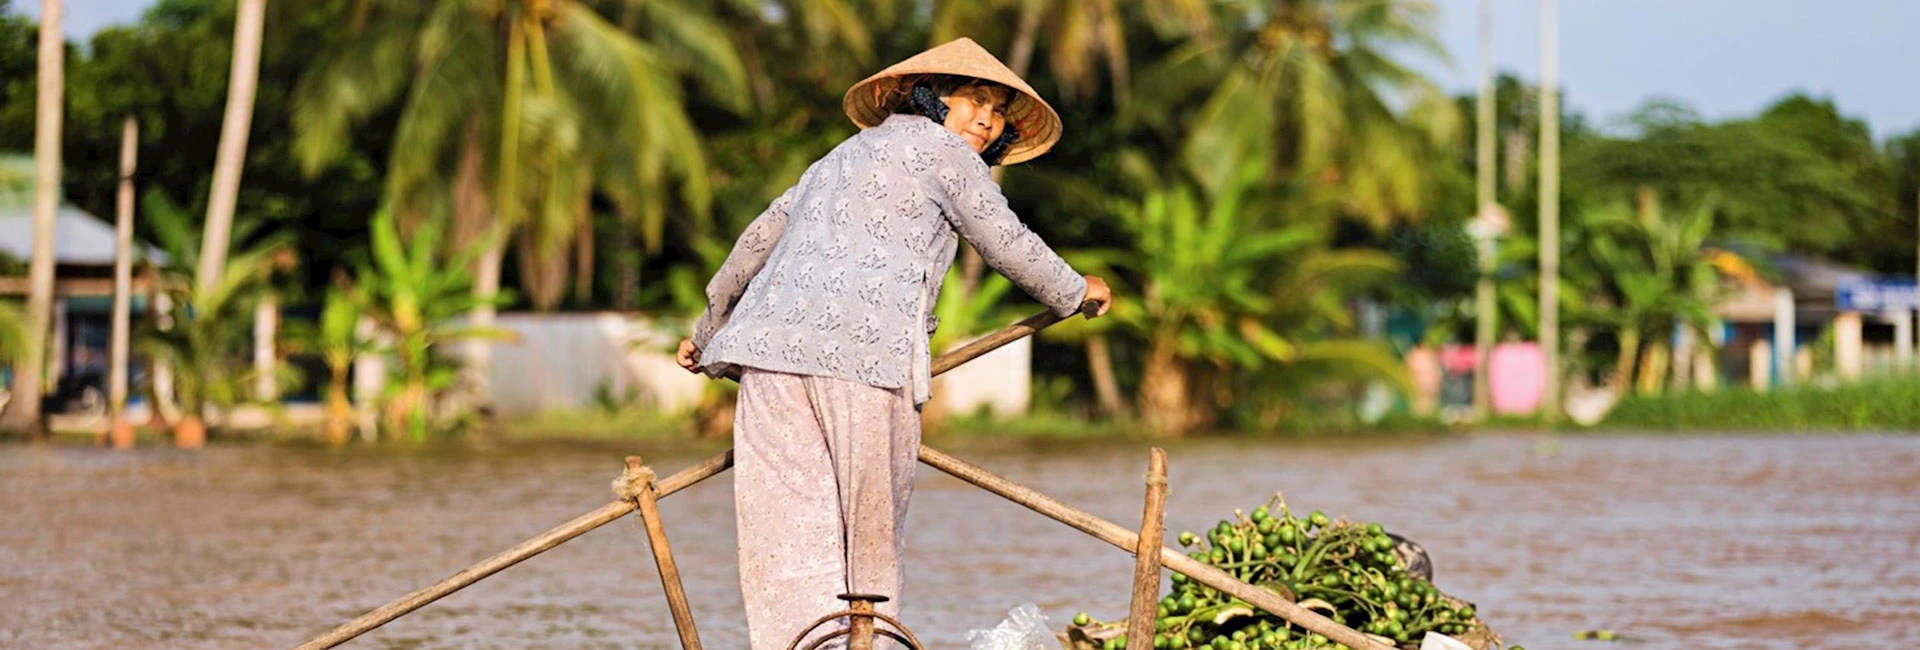 The Authentic Mekong Delta Tour 5 Days